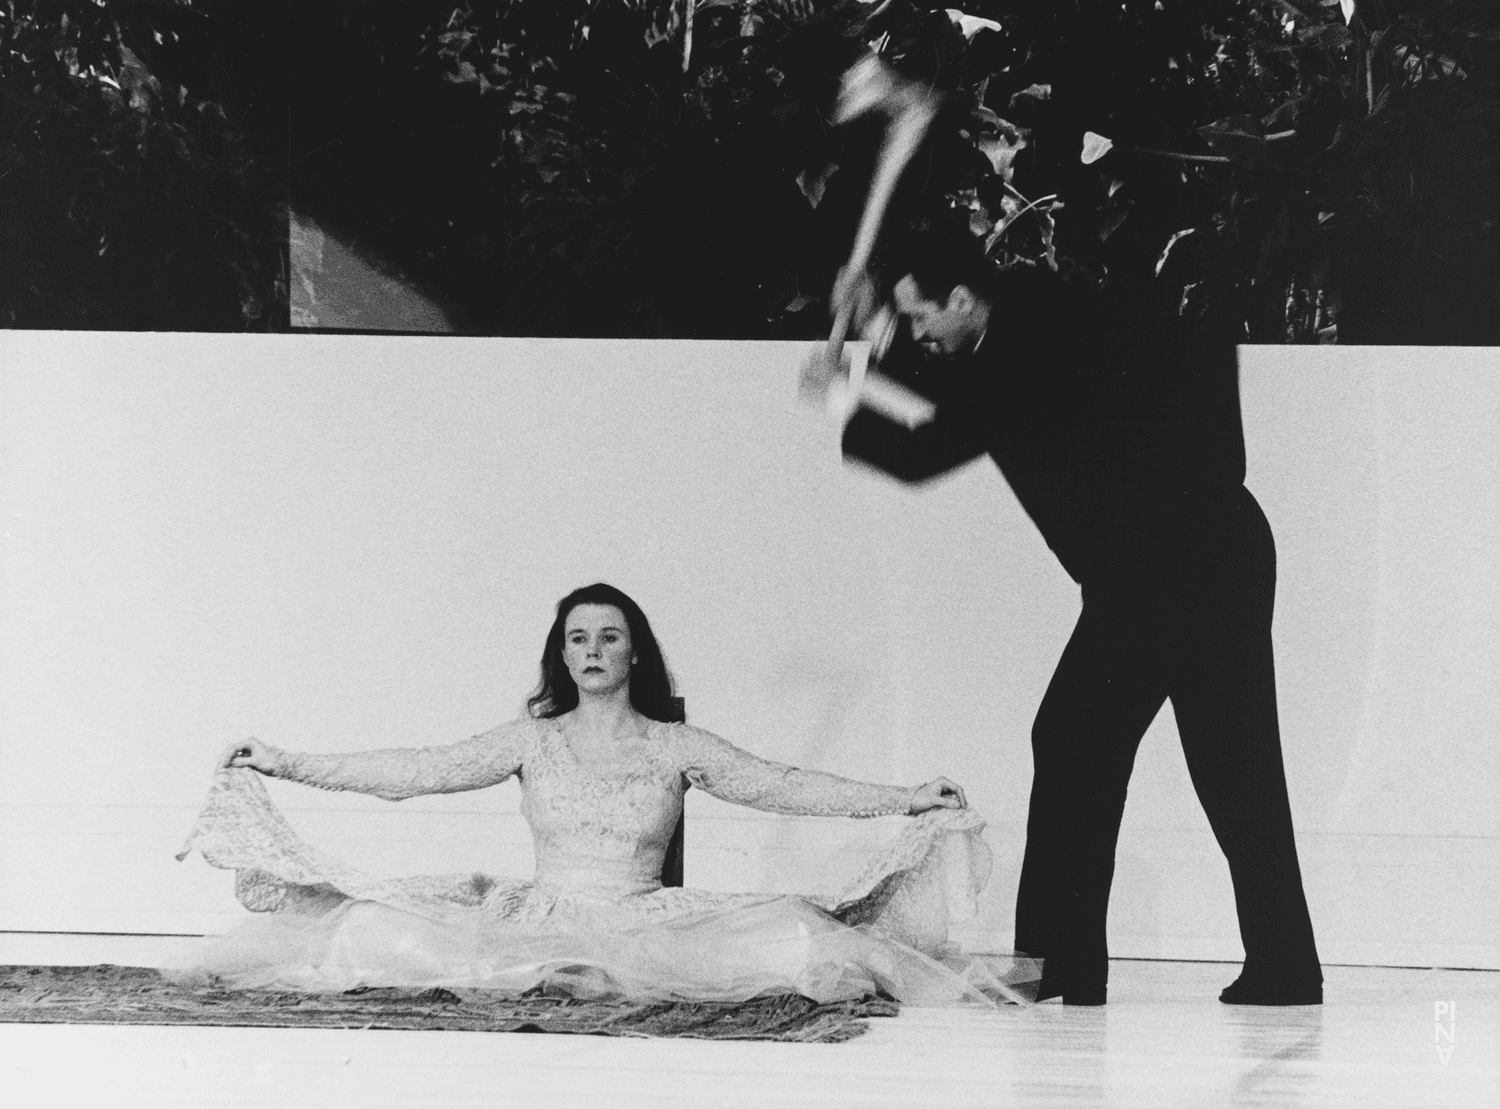 Jan Minařík and Josephine Ann Endicott in “Two Cigarettes in the Dark” by Pina Bausch